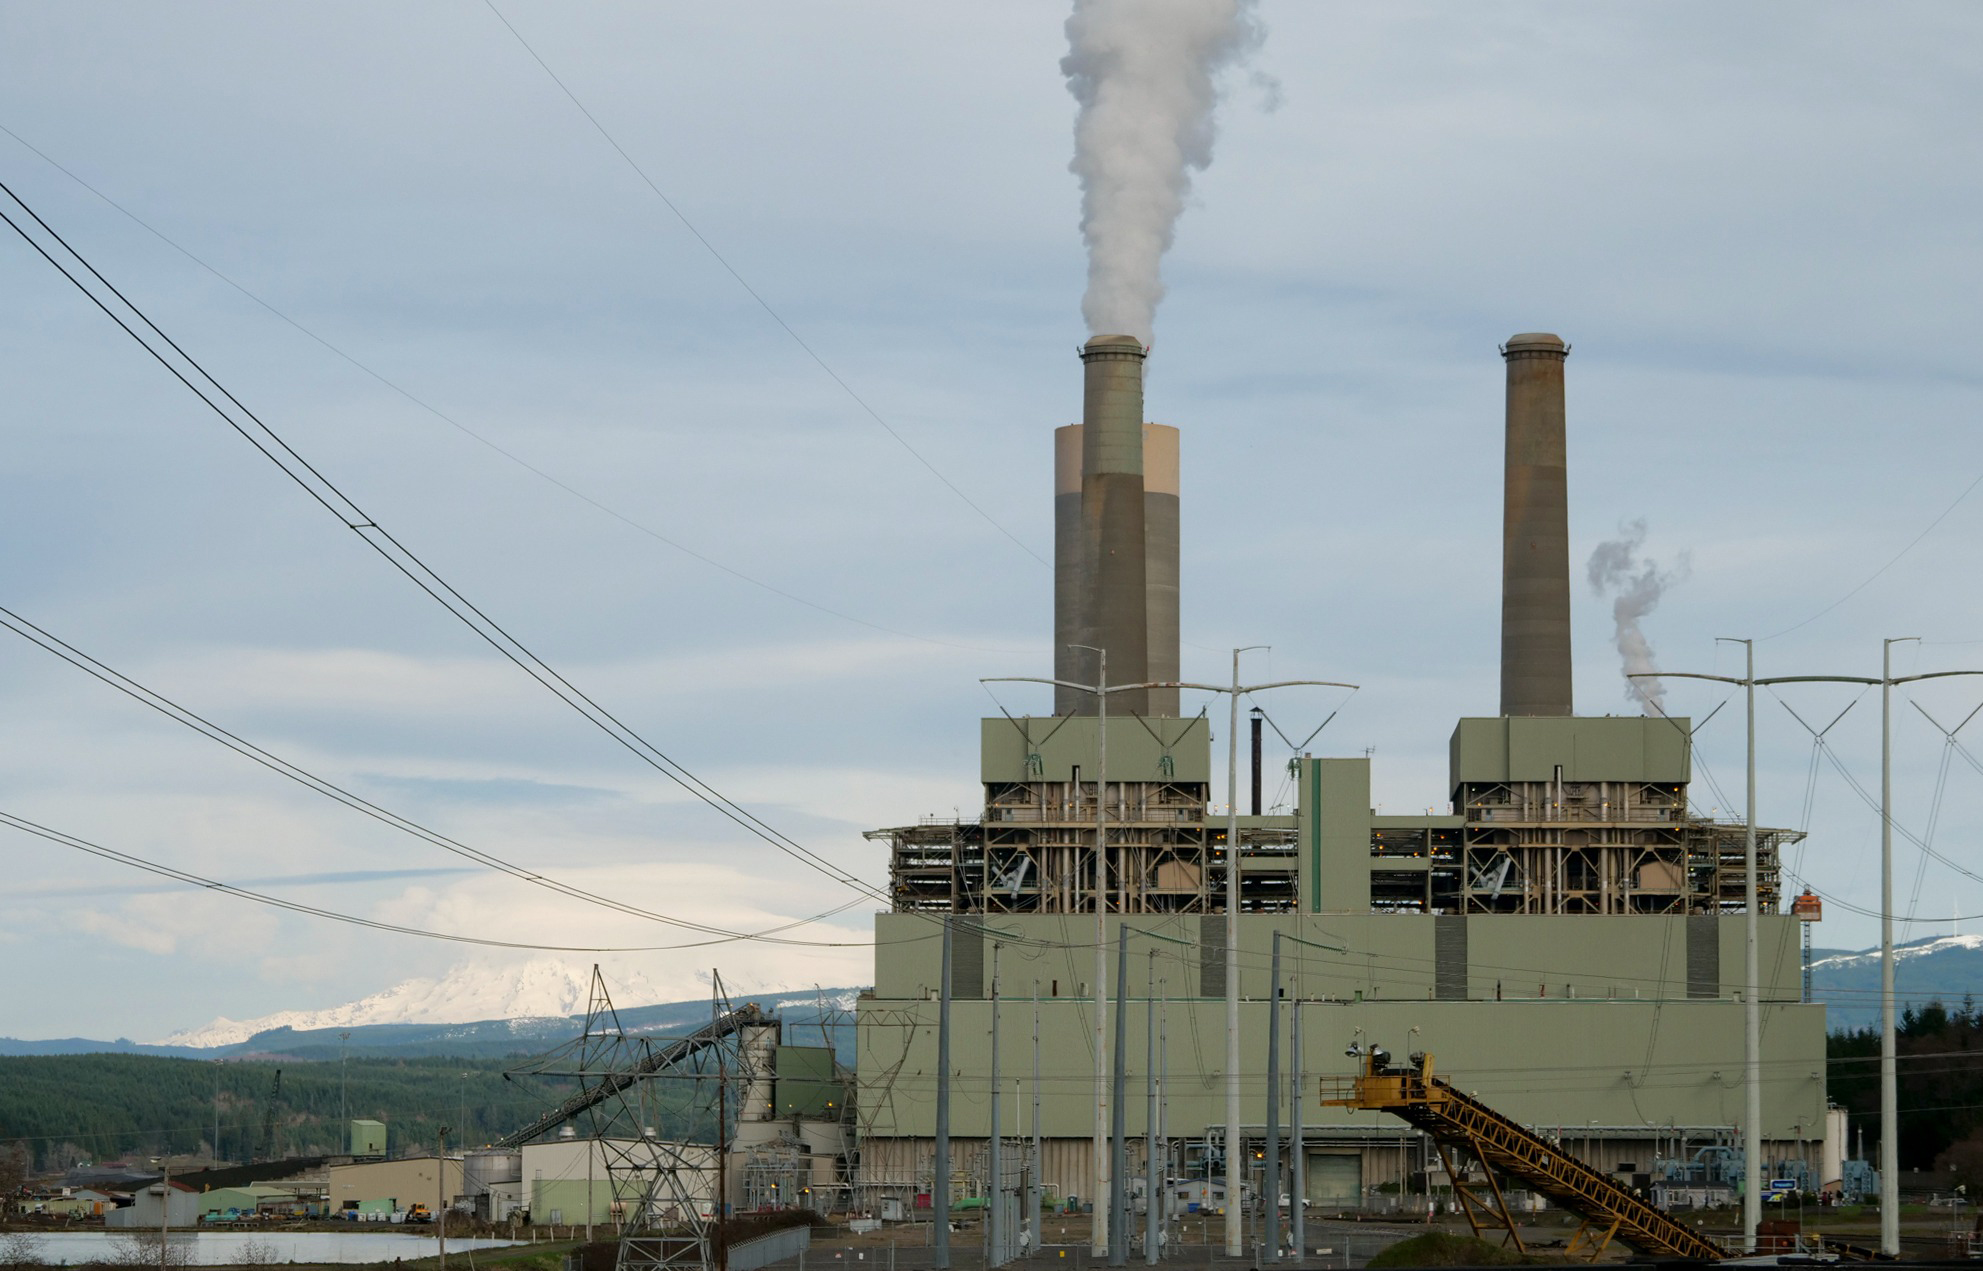 A Washington State Coal Plant Has to Close Next Year. Can Pennsylvania Communities Learn From Centralias Transition? [Video]